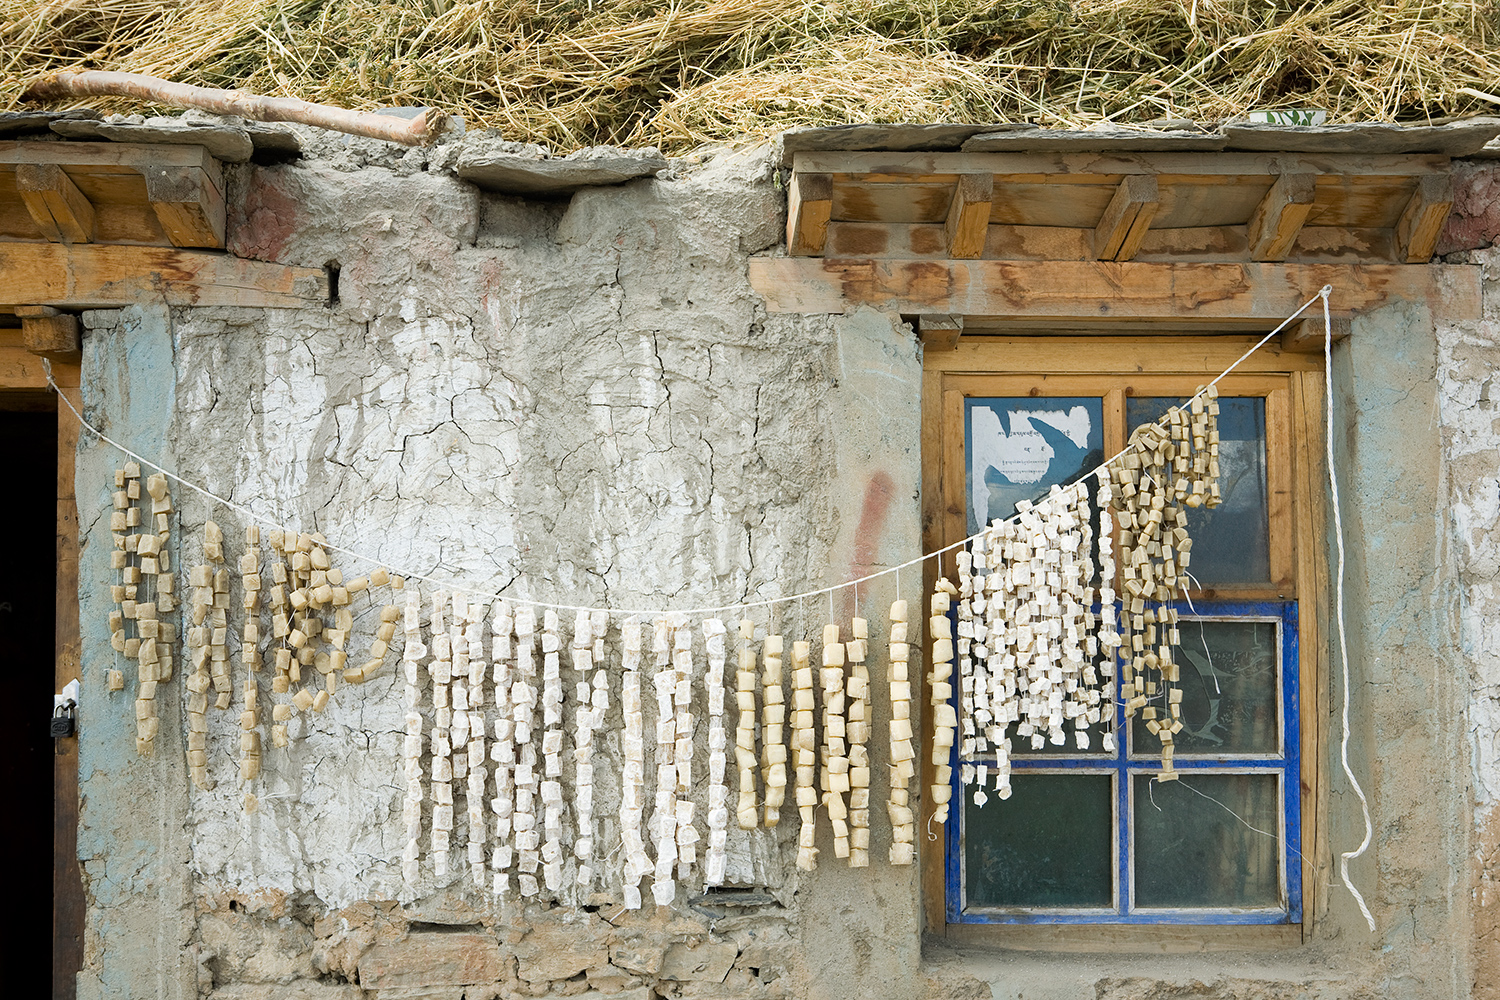  Squares of yak cheese, a hard mass that is eaten like candy, dries outside a home. 